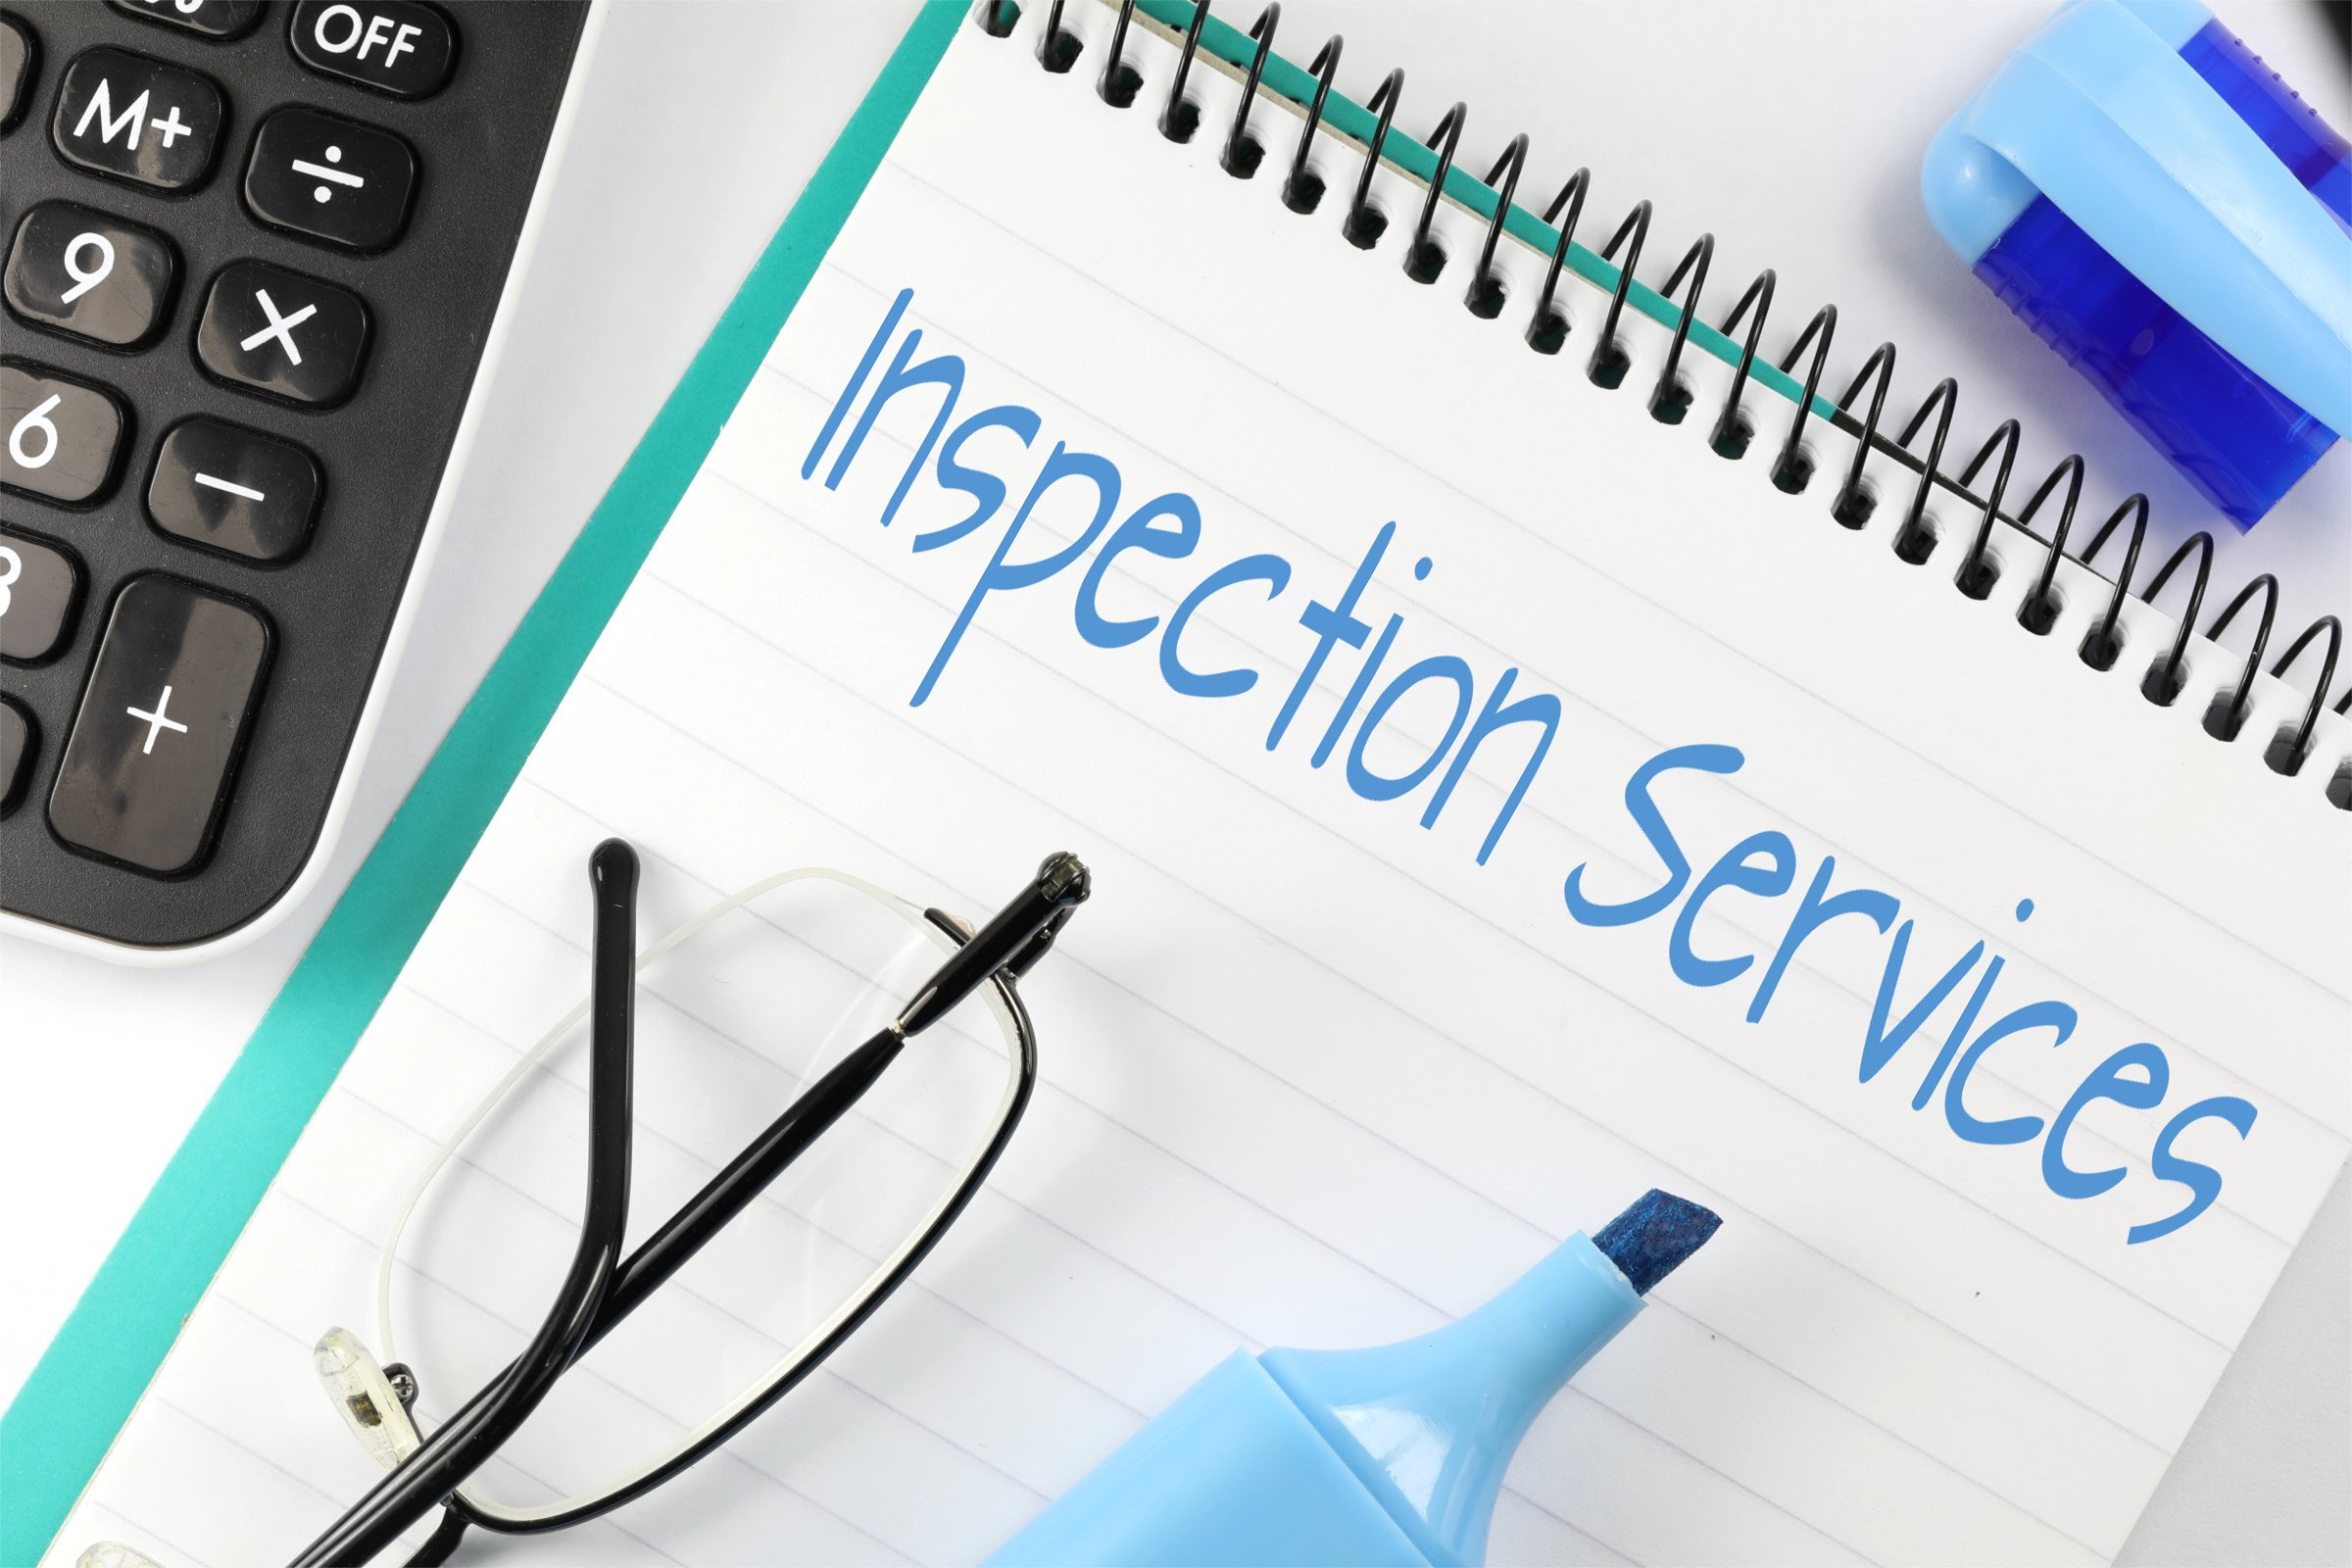 inspection services